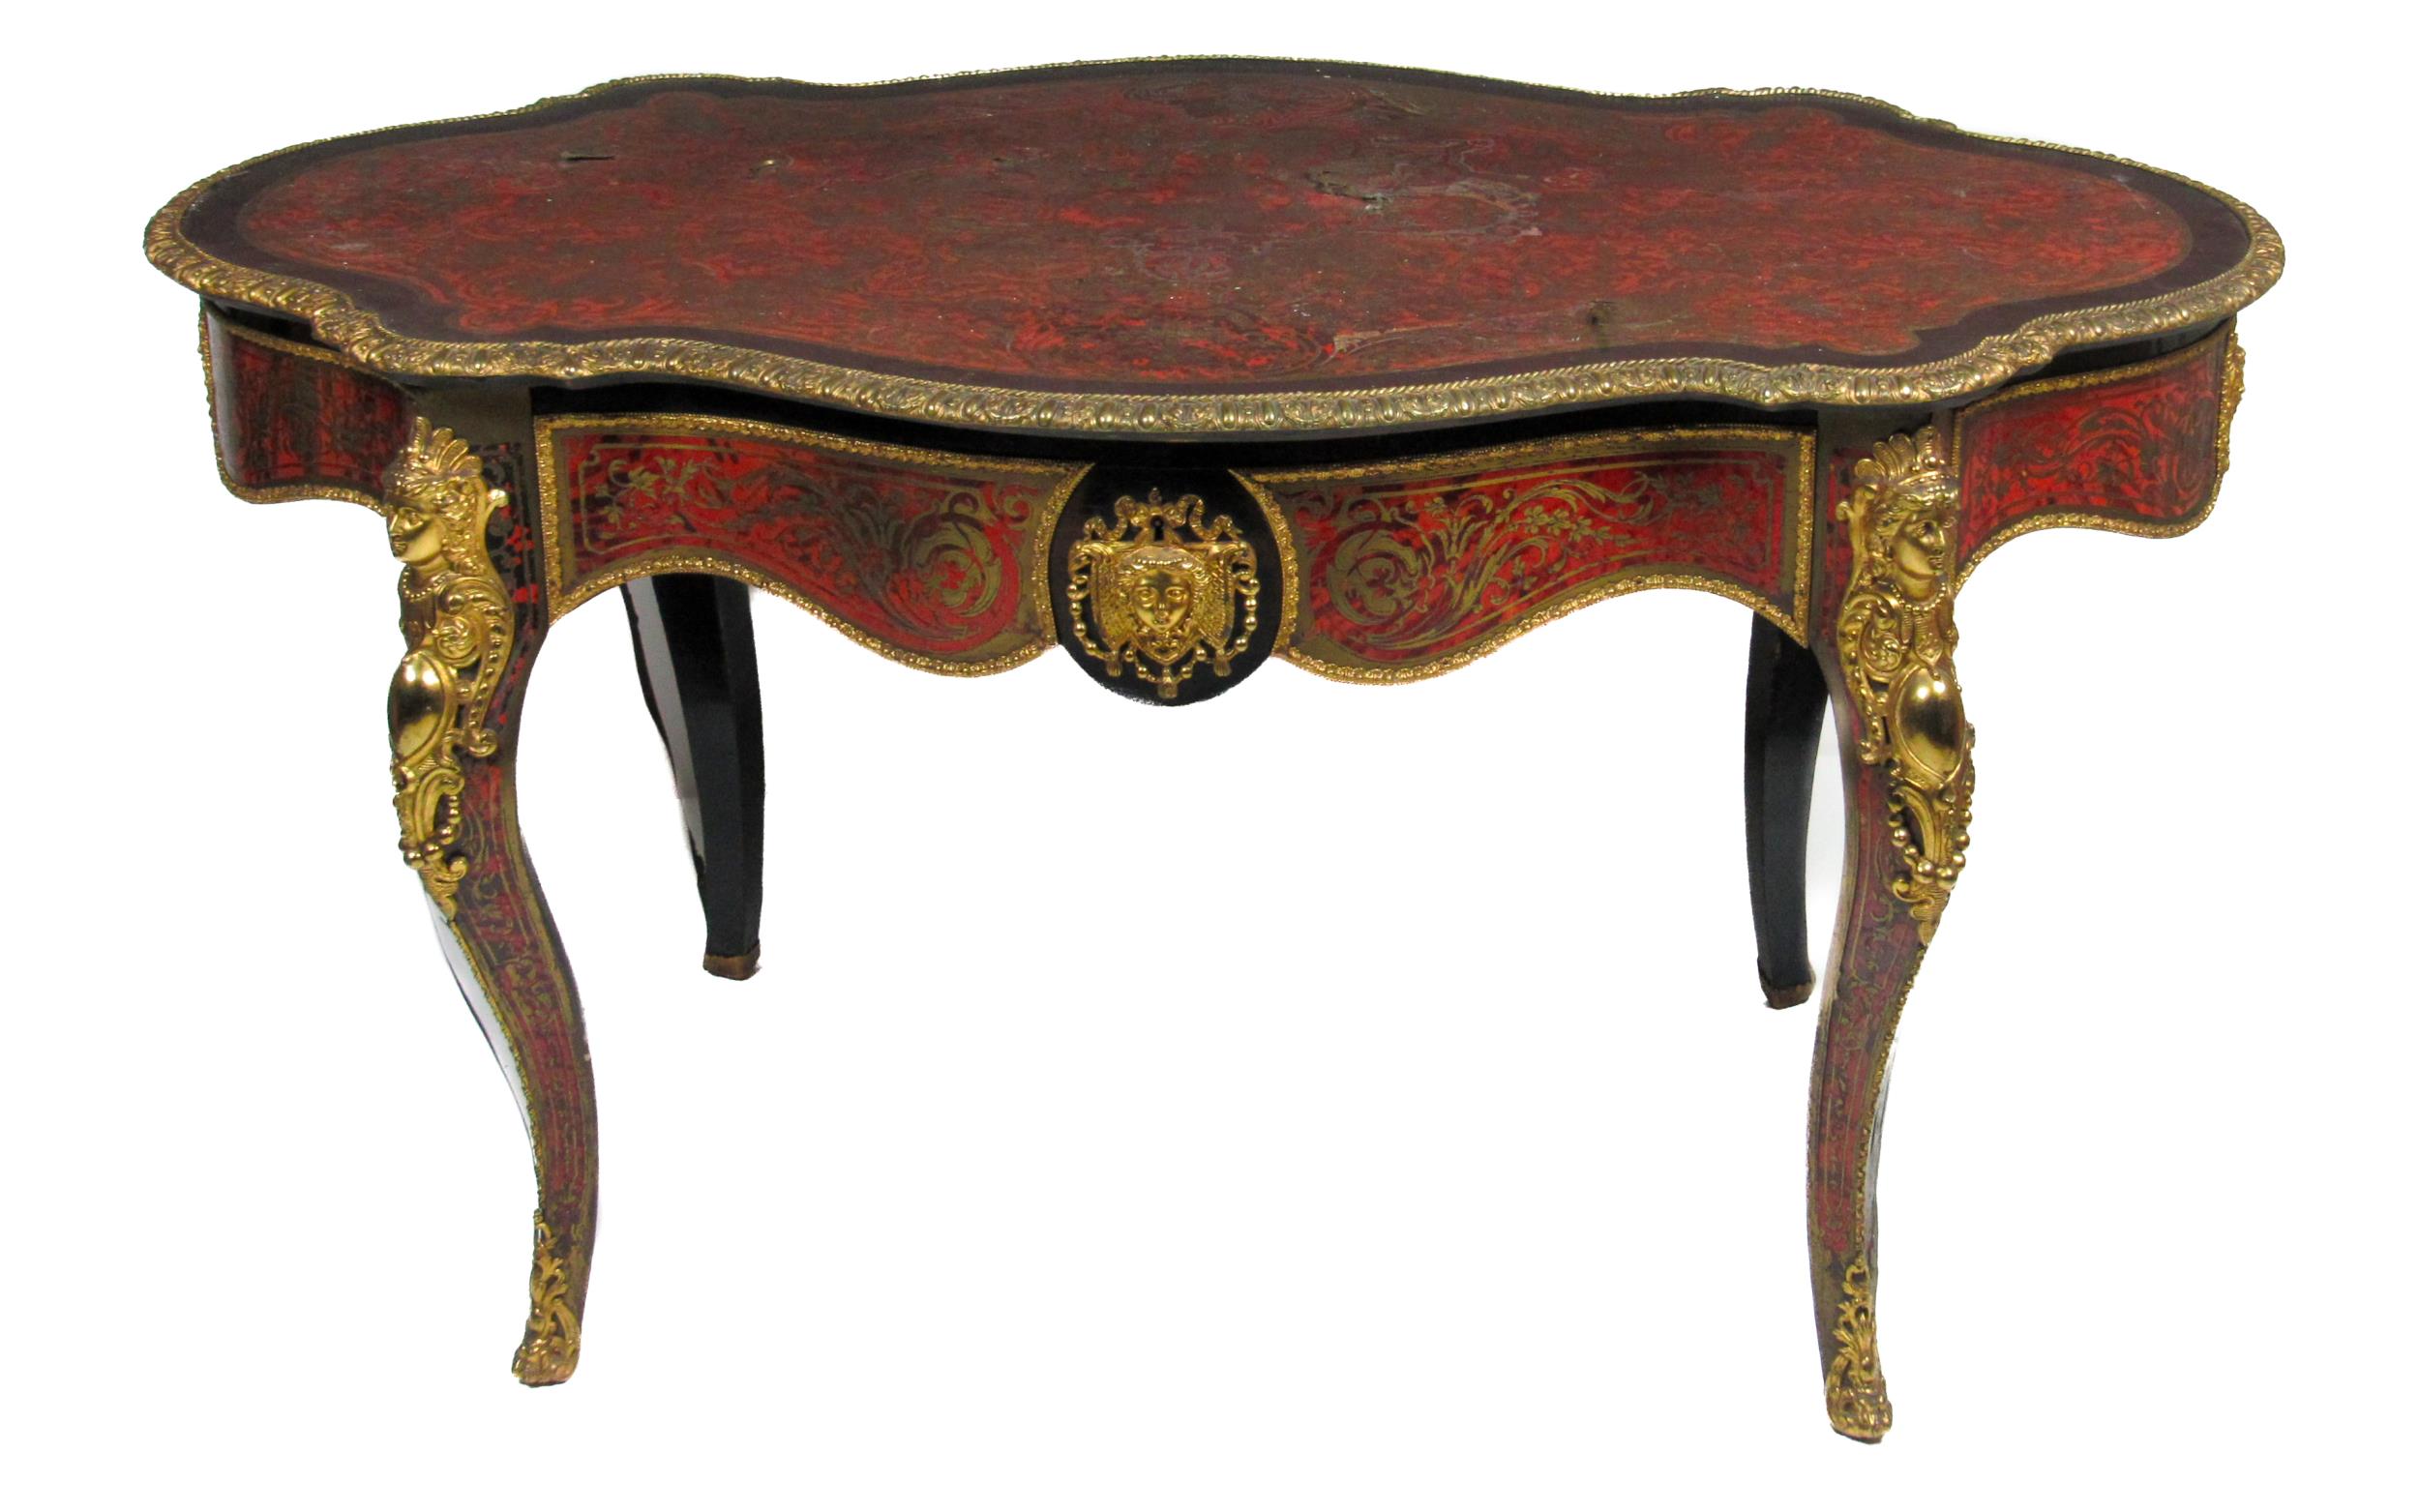 A 19th Century French ormolu mounted red boulle Table, the shaped oval top with cast egg n' dart